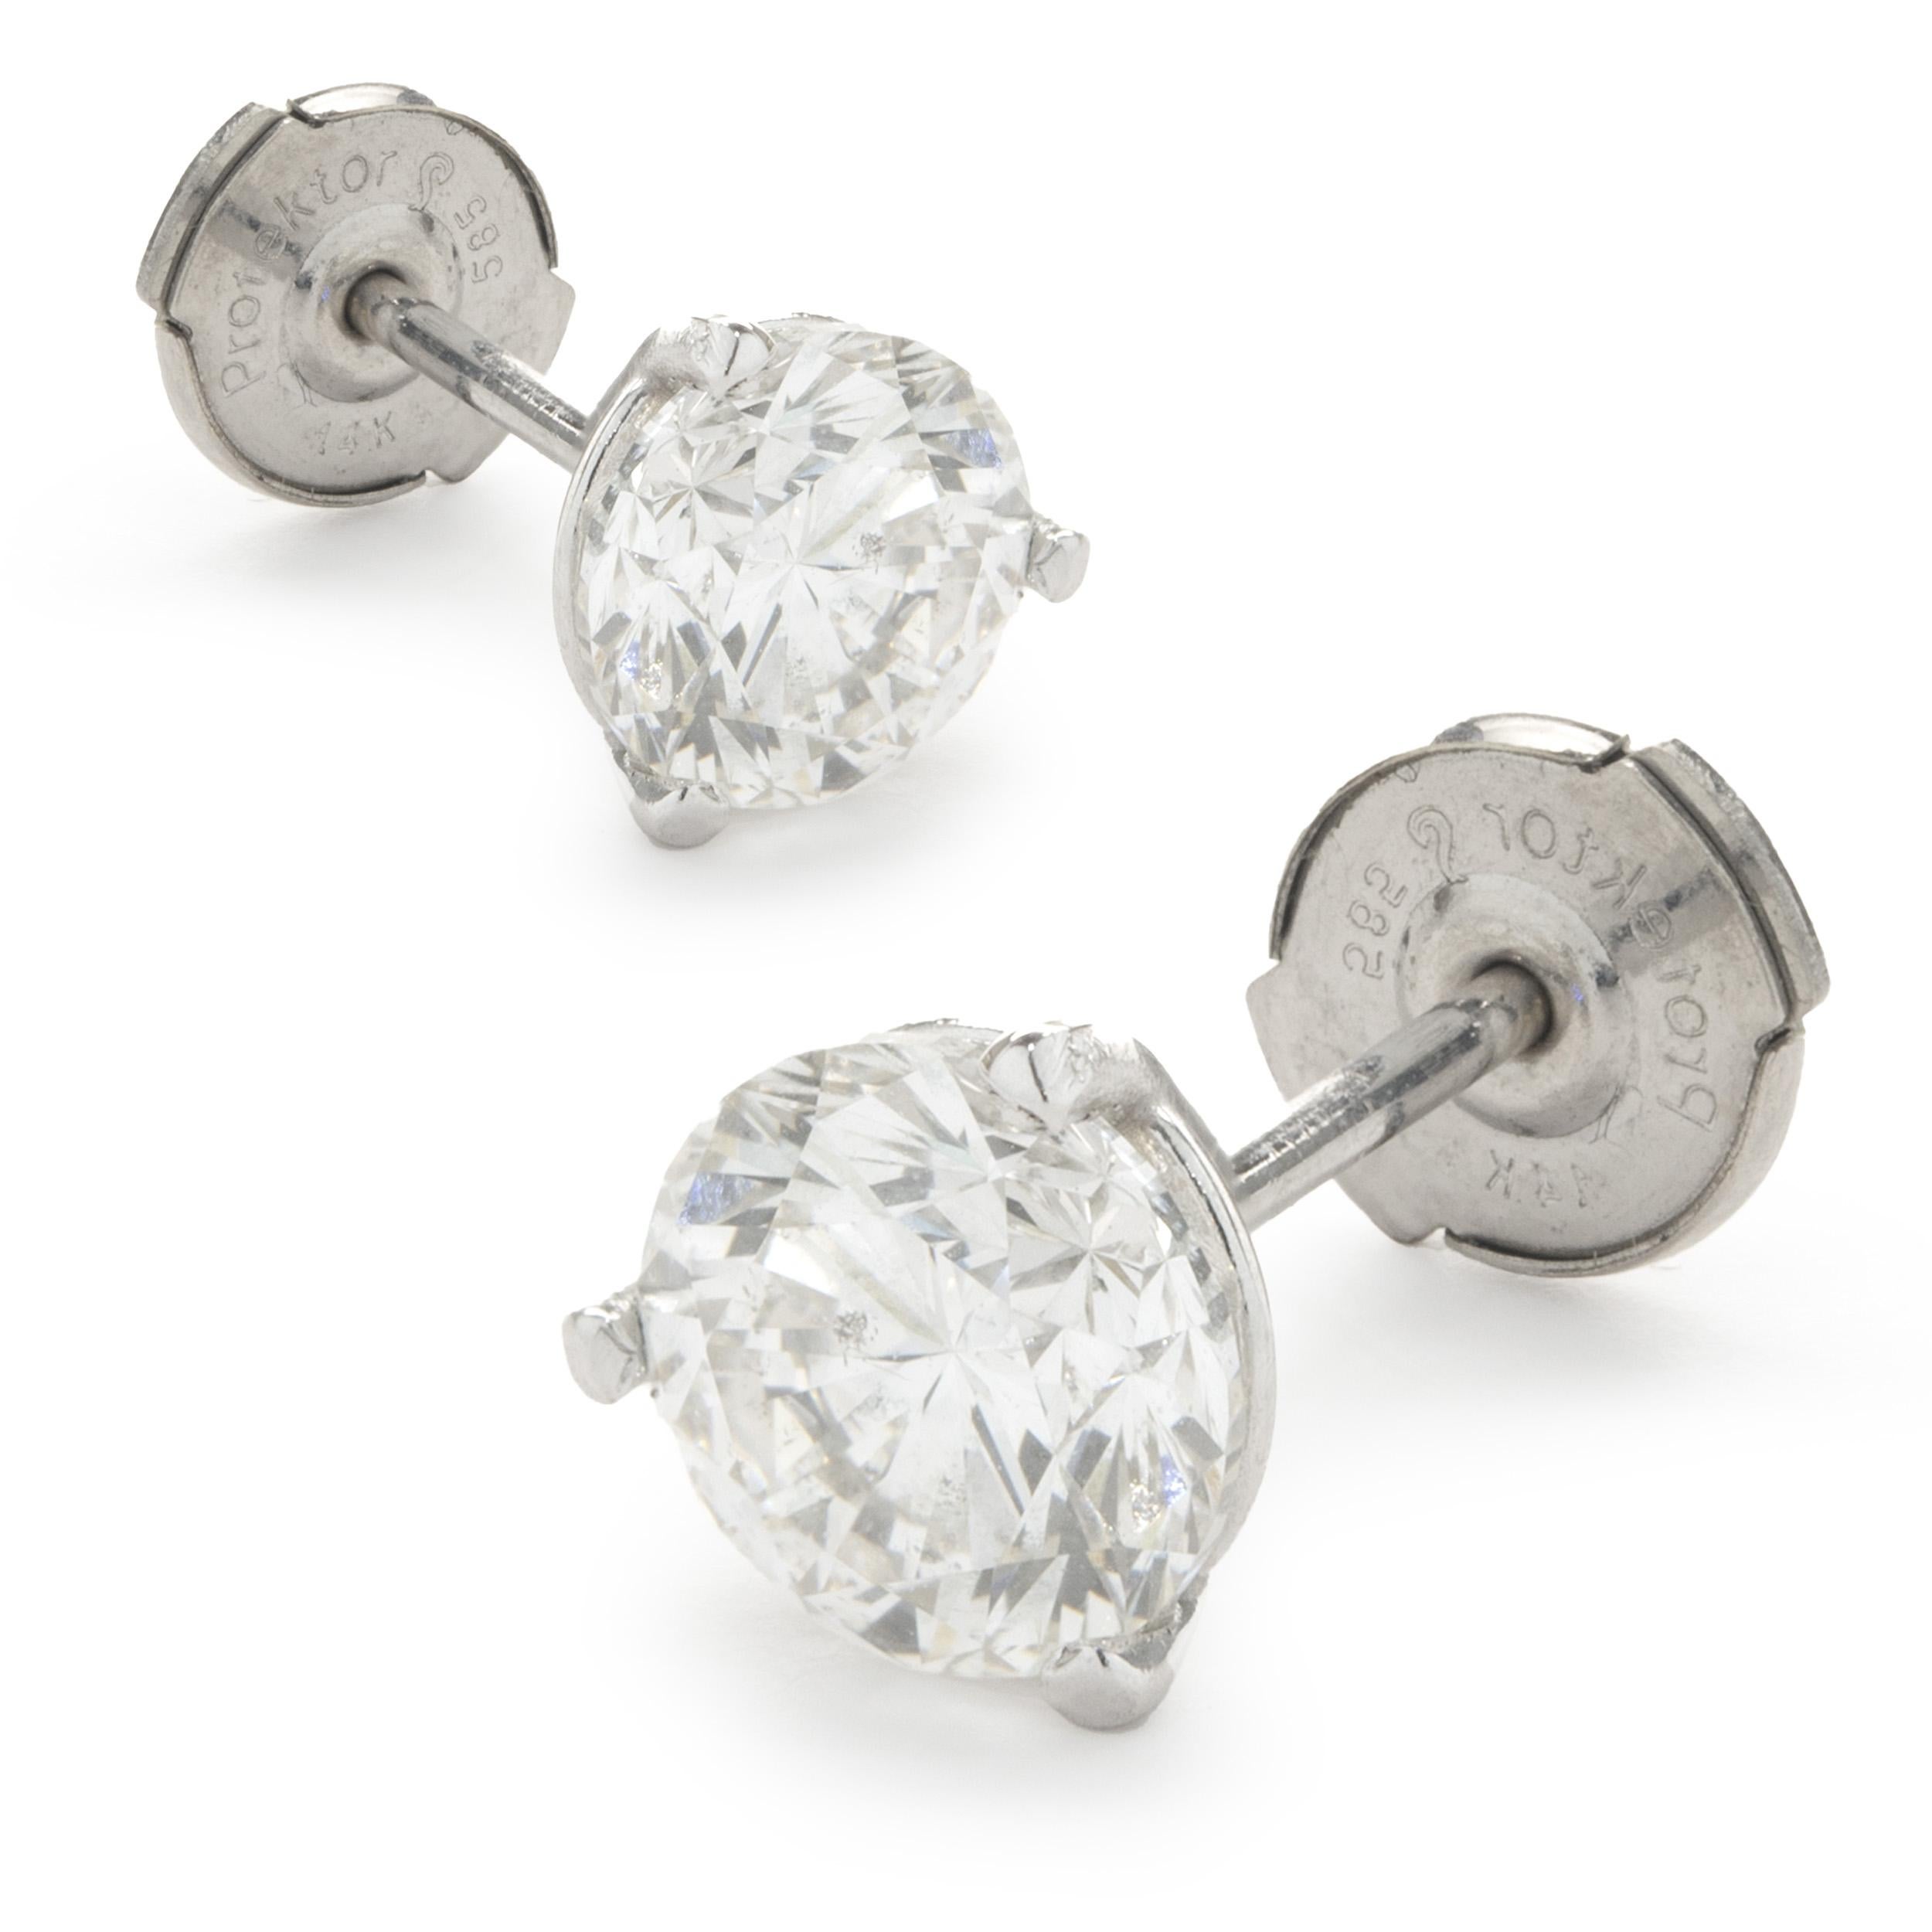 14 Karat White Gold Round Brilliant Cut Diamond Stud Earrings In Excellent Condition For Sale In Scottsdale, AZ